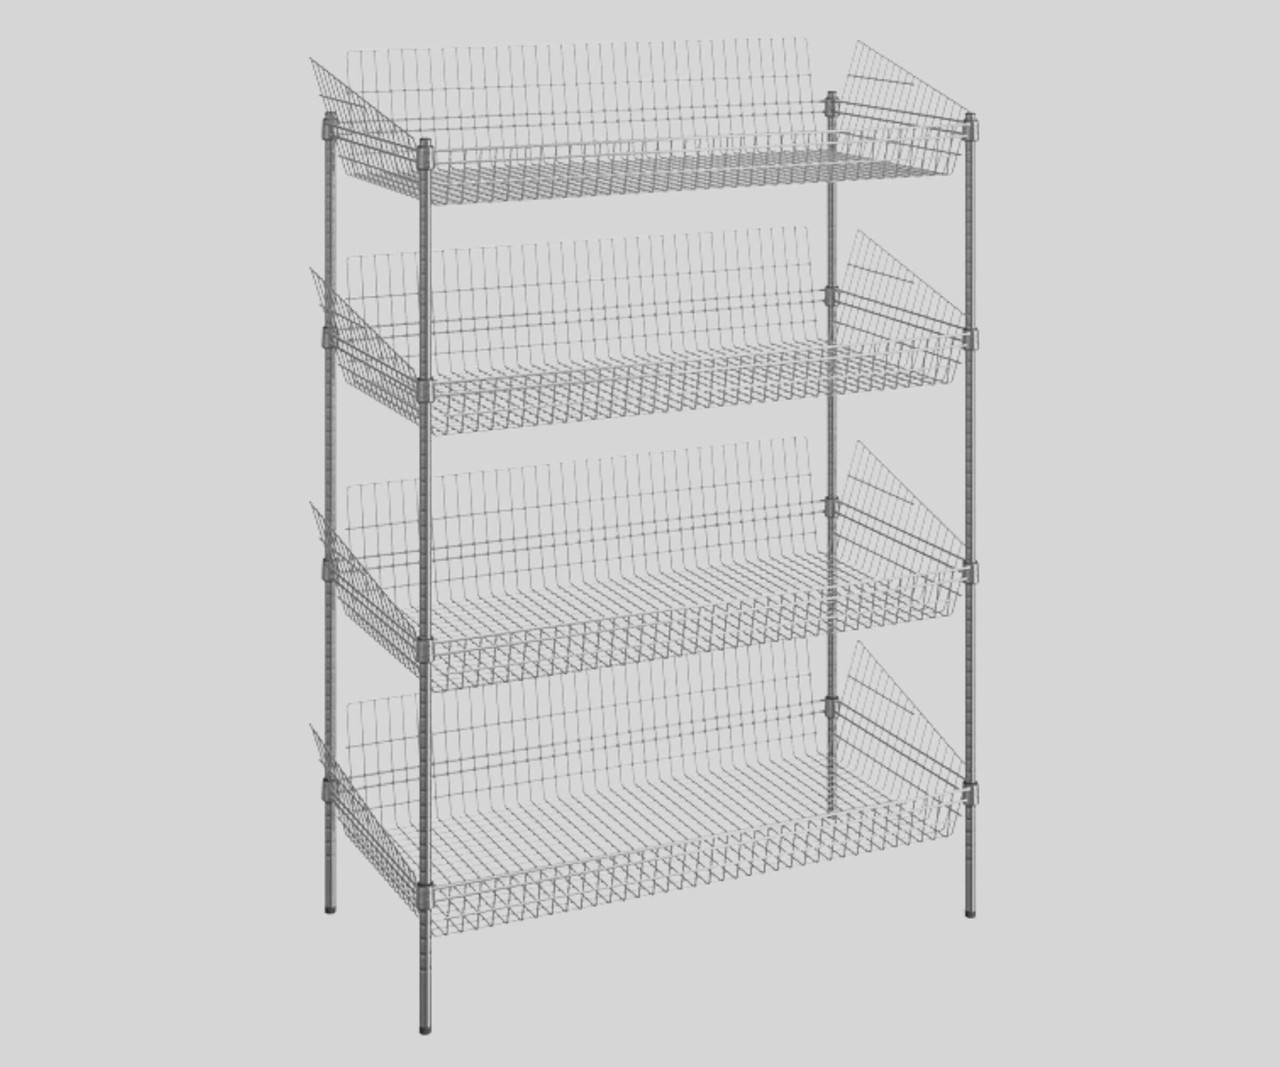 Chicken Pieces CP 24" x 48" x 64" NSF Chrome Stationary 4 Basket Retail Storage Display Stand | Organize and Showcase with Efficiency